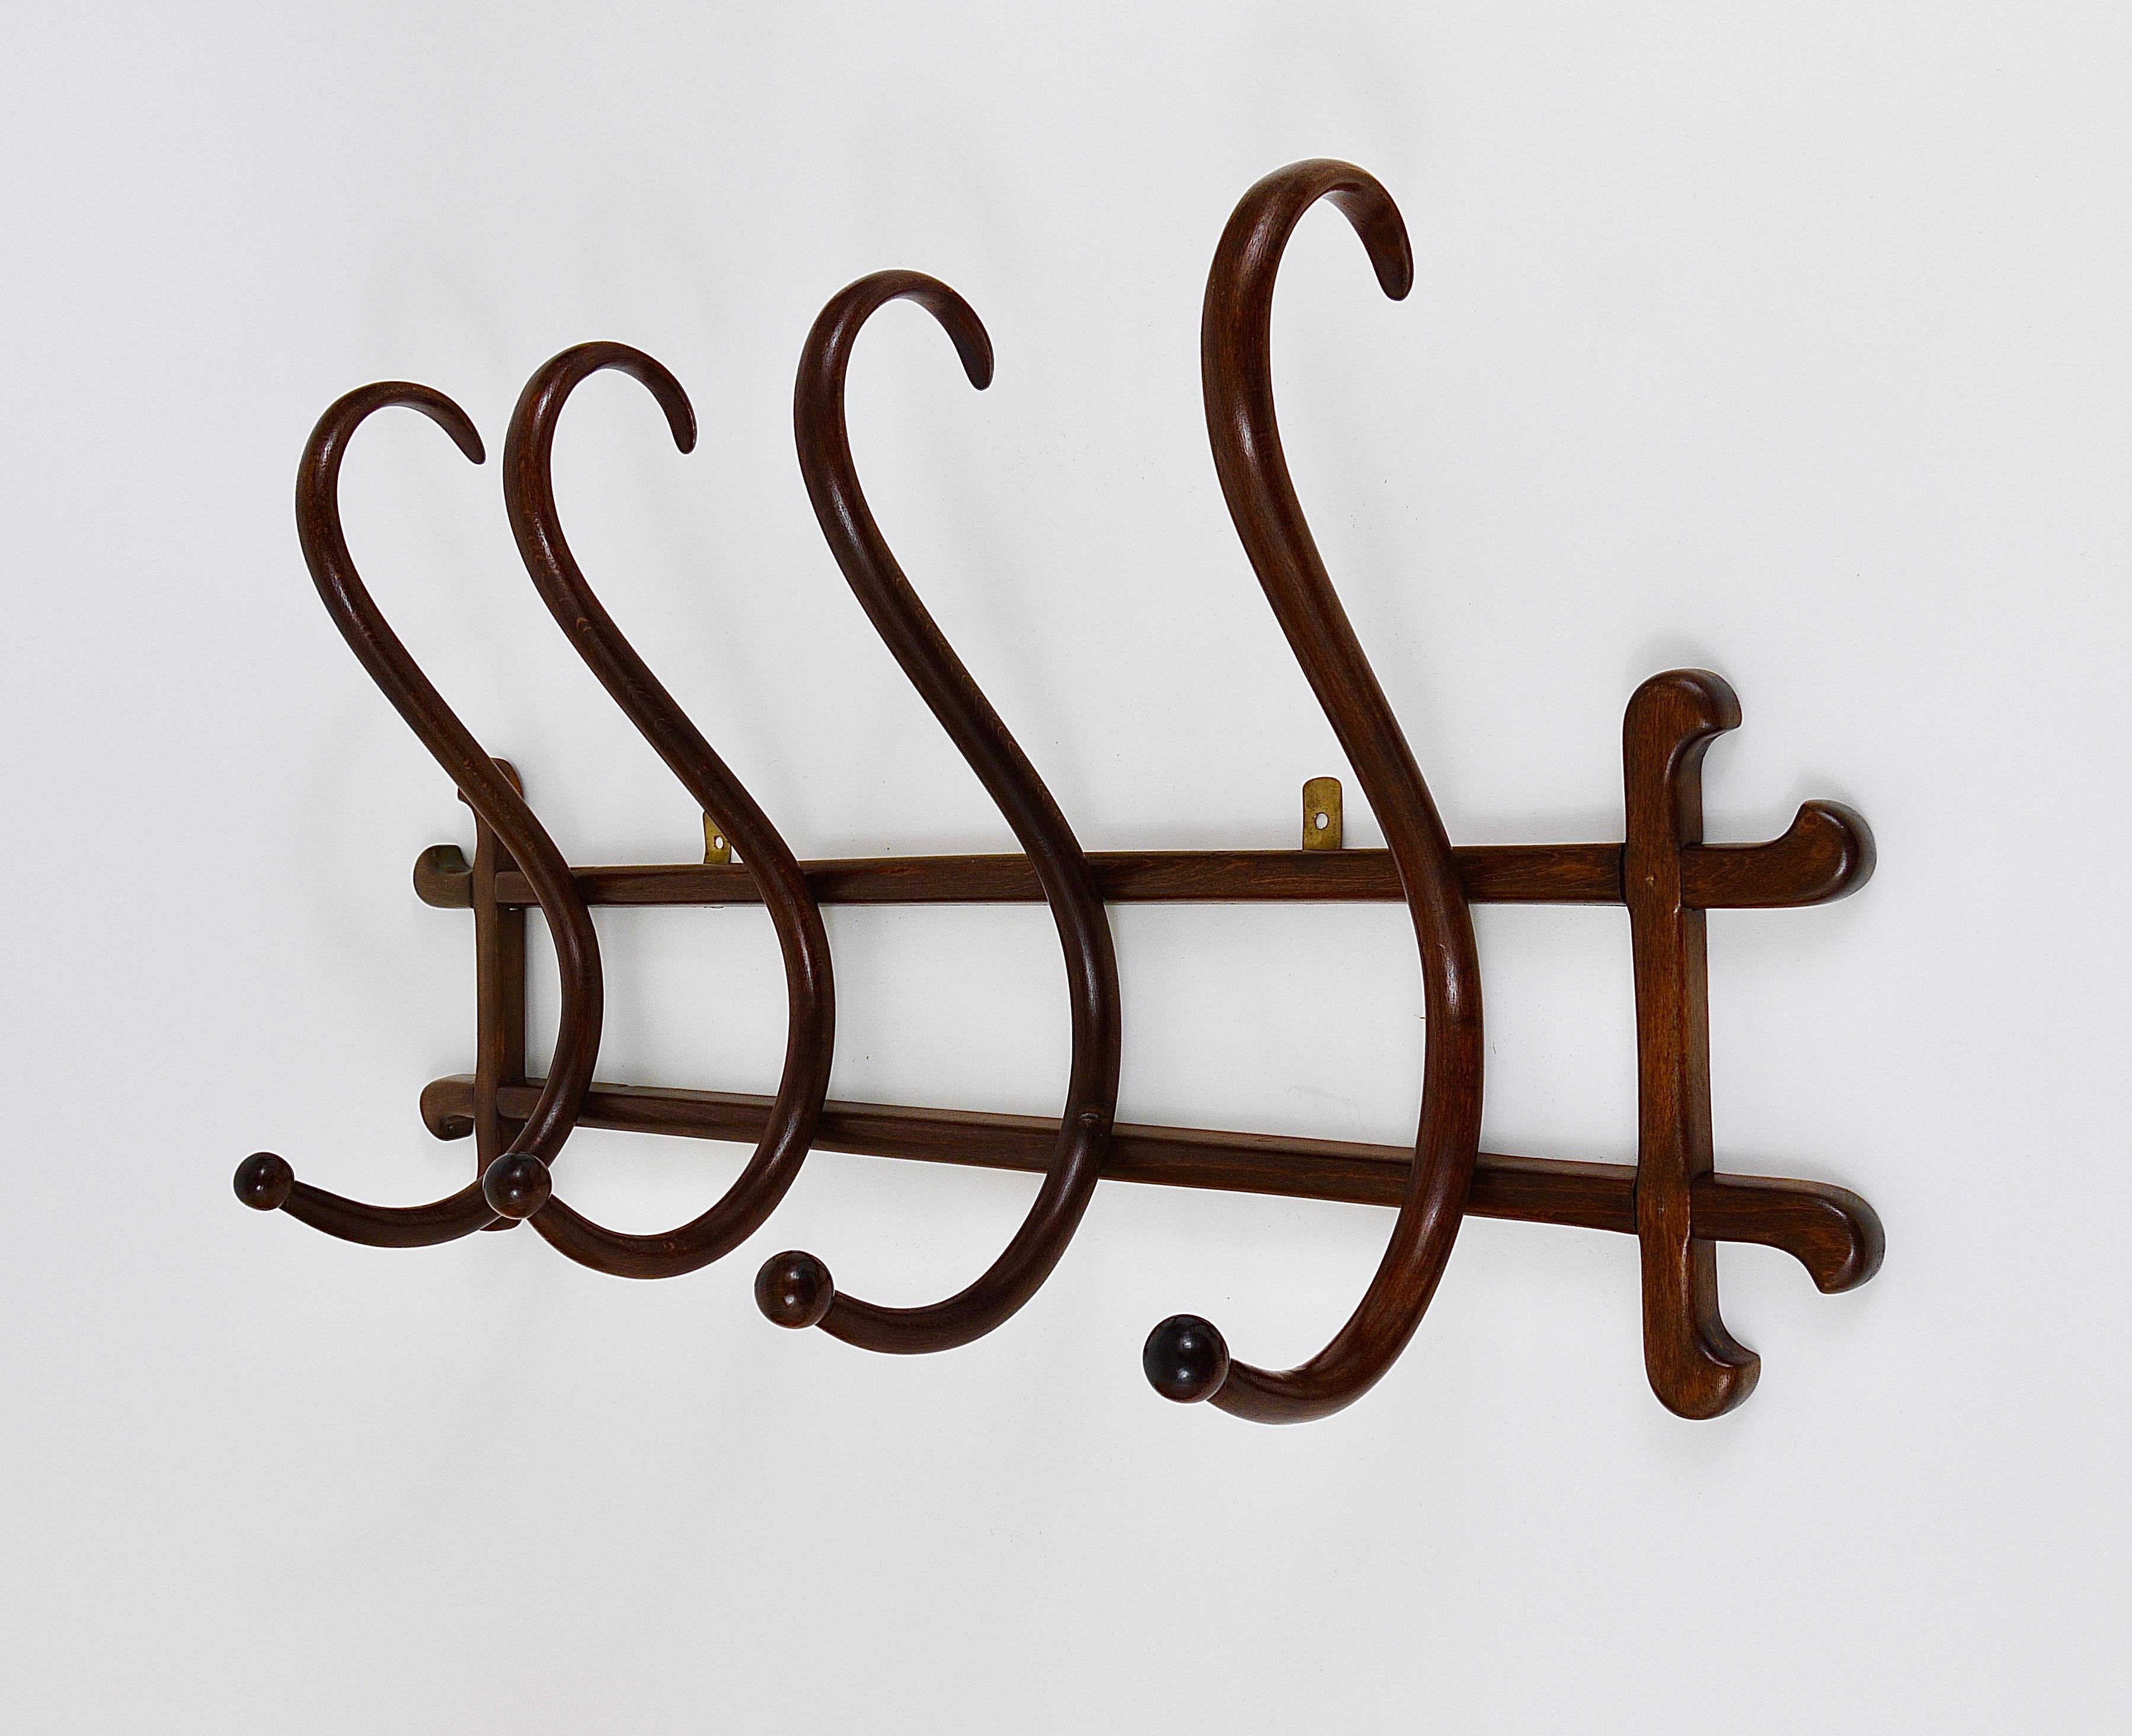 1900s Thonet Art Nouveau Secession Bentwood Wall Coat Rack with four Hangers 7